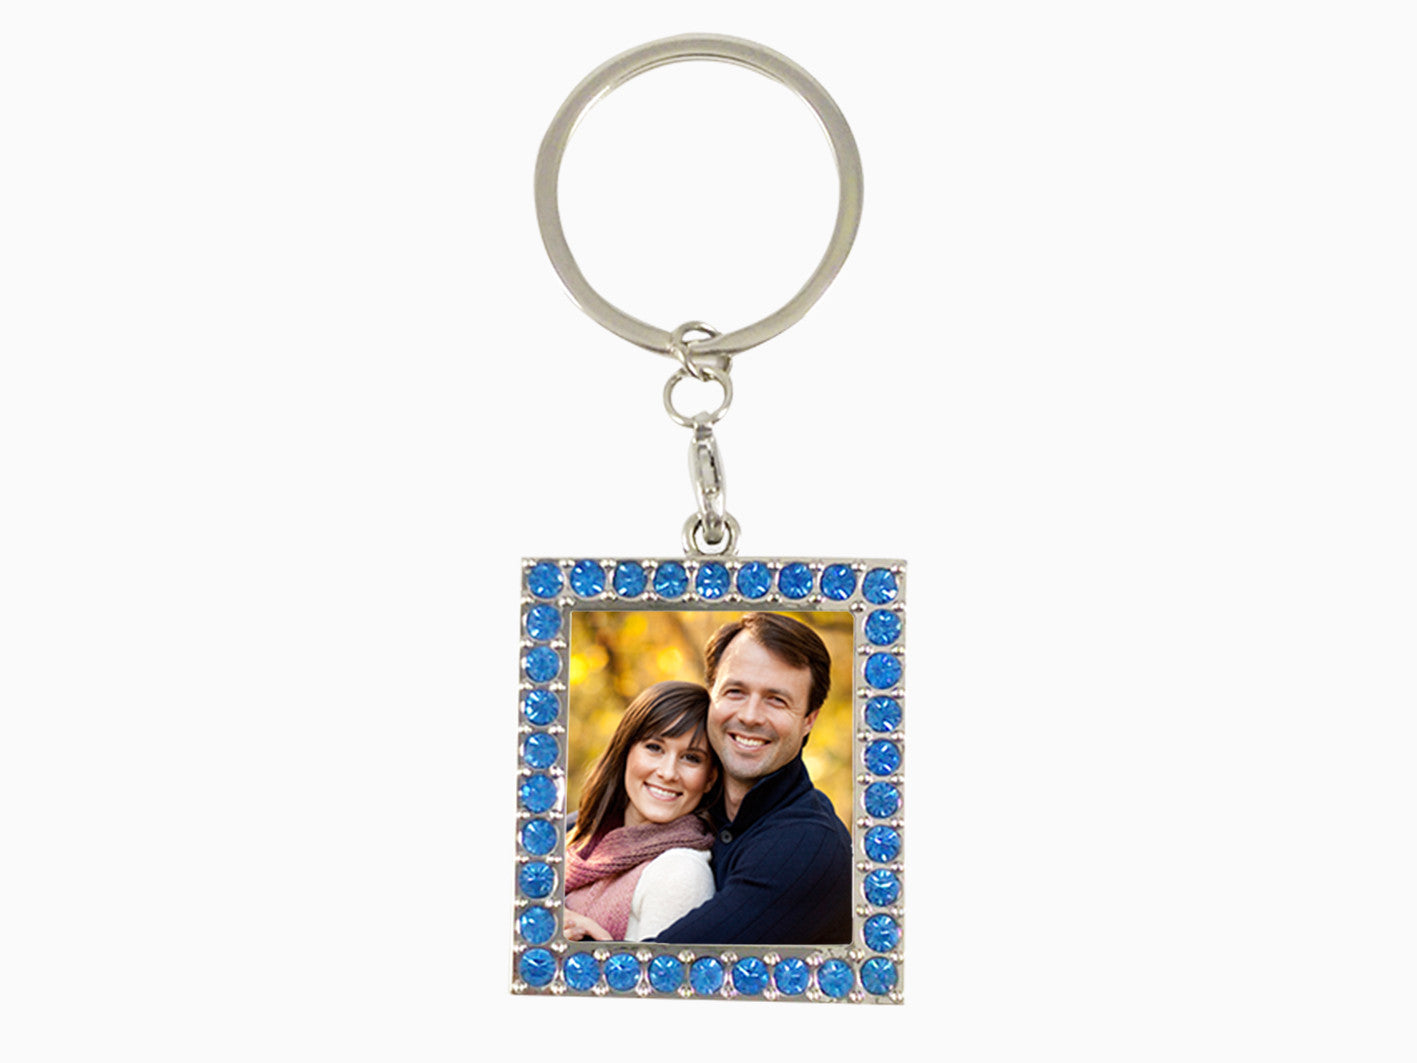 Personalised Photo Keychain (Combo Set of 2) Customised with Photo Key Chain  with Picture for Bike,